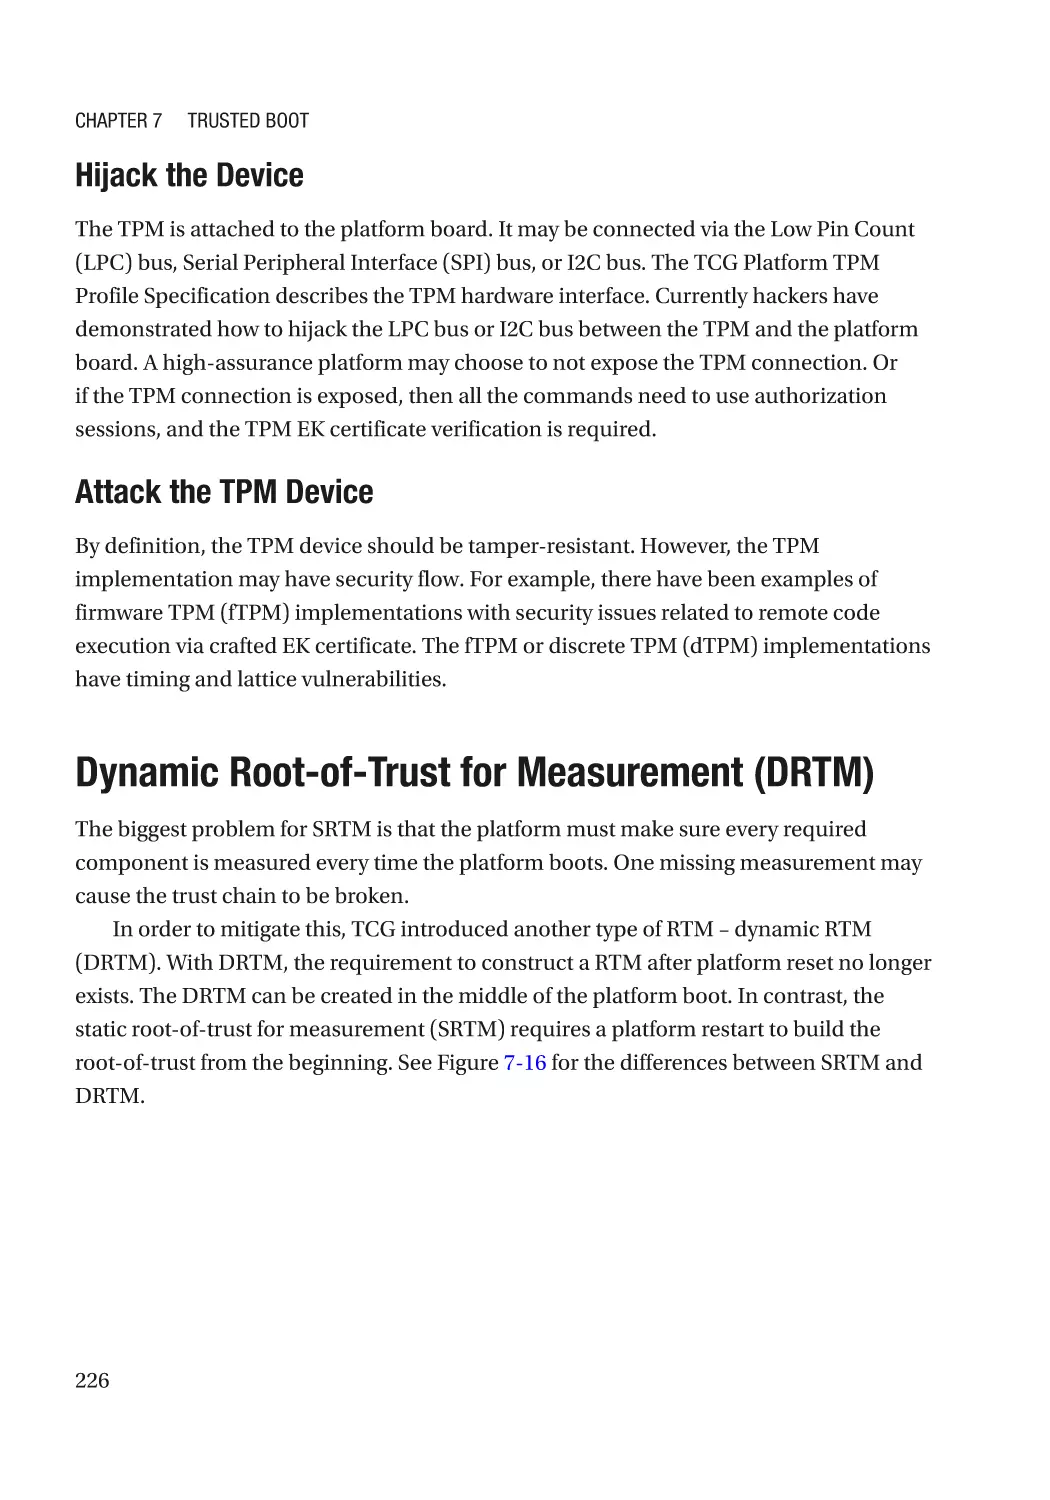 Hijack the Device
Attack the TPM Device
Dynamic Root-of-Trust for Measurement (DRTM)